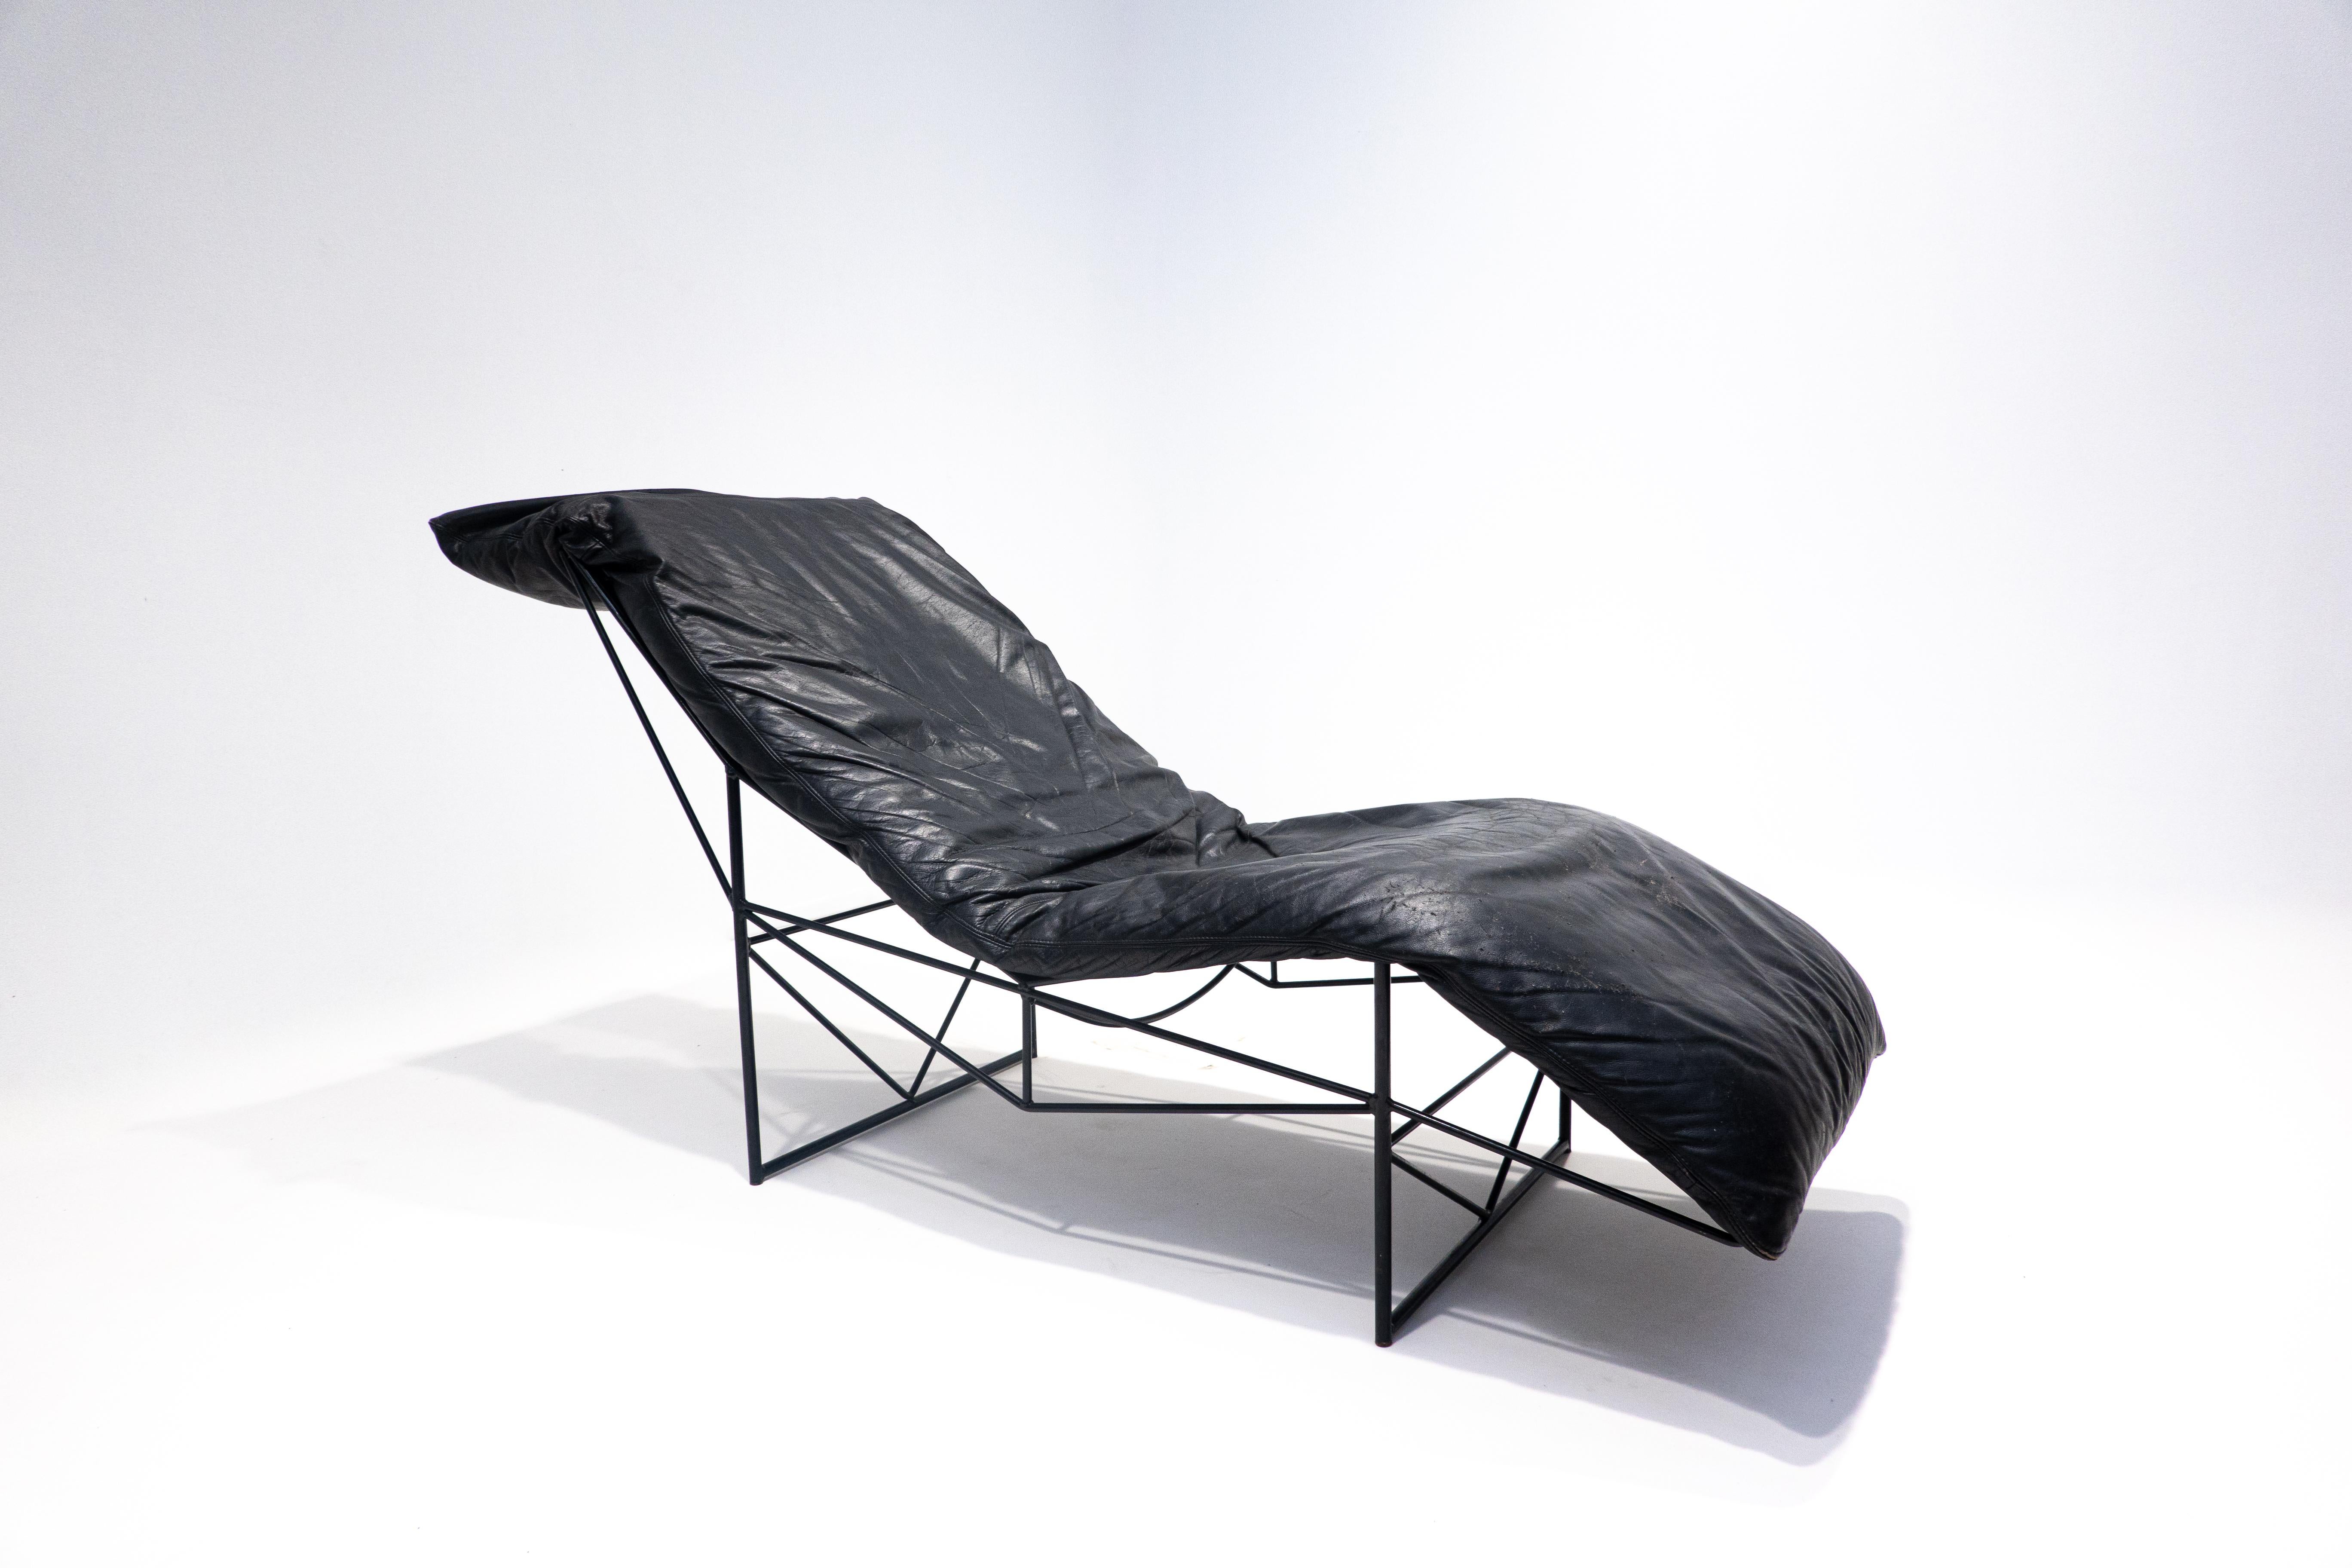 Late 20th Century Lounge Chair by Paolo Passerini for Uvet, Italy, 1985